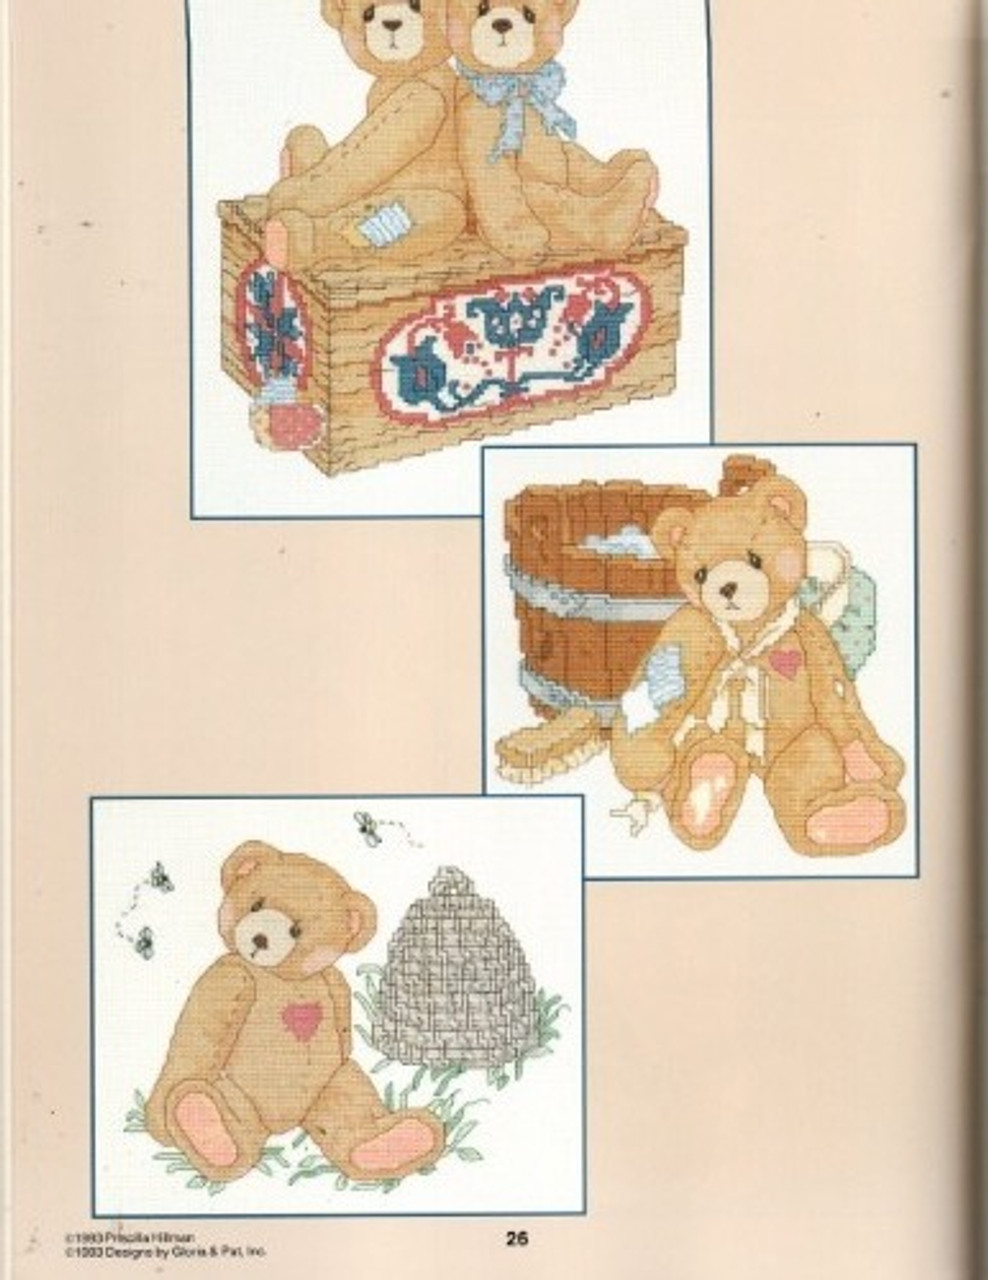 Counted Cross Stitch Pattern Books Priscilla Hillman's Cute Critter Designs  From Gloria & Pat Bashful Bunnies or Mouse Tales 